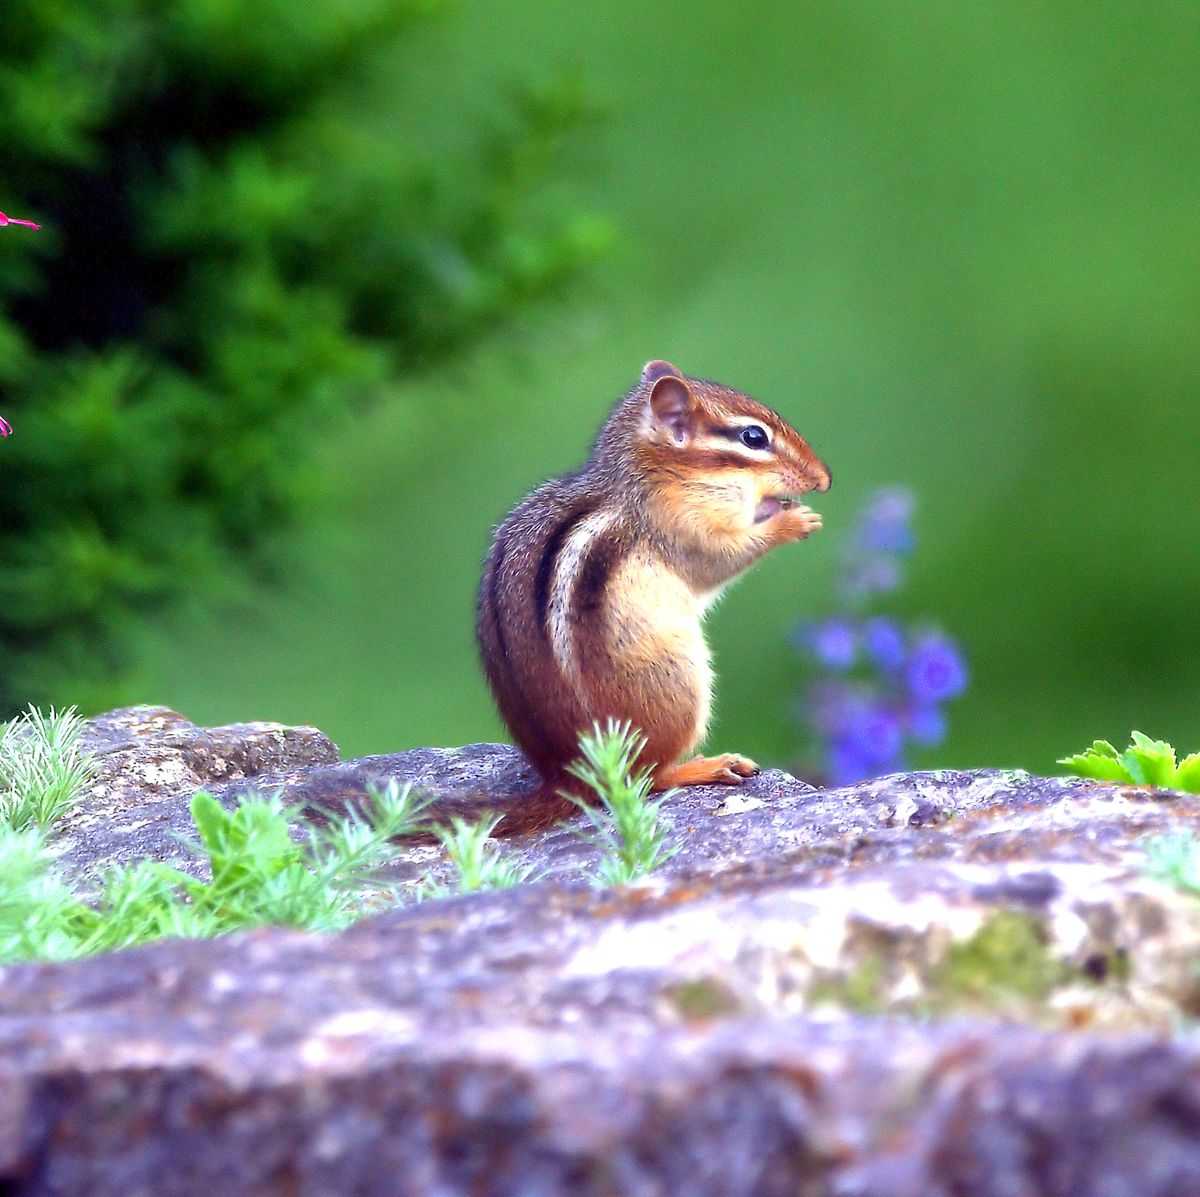 Tips About How To Kill Chipmunks